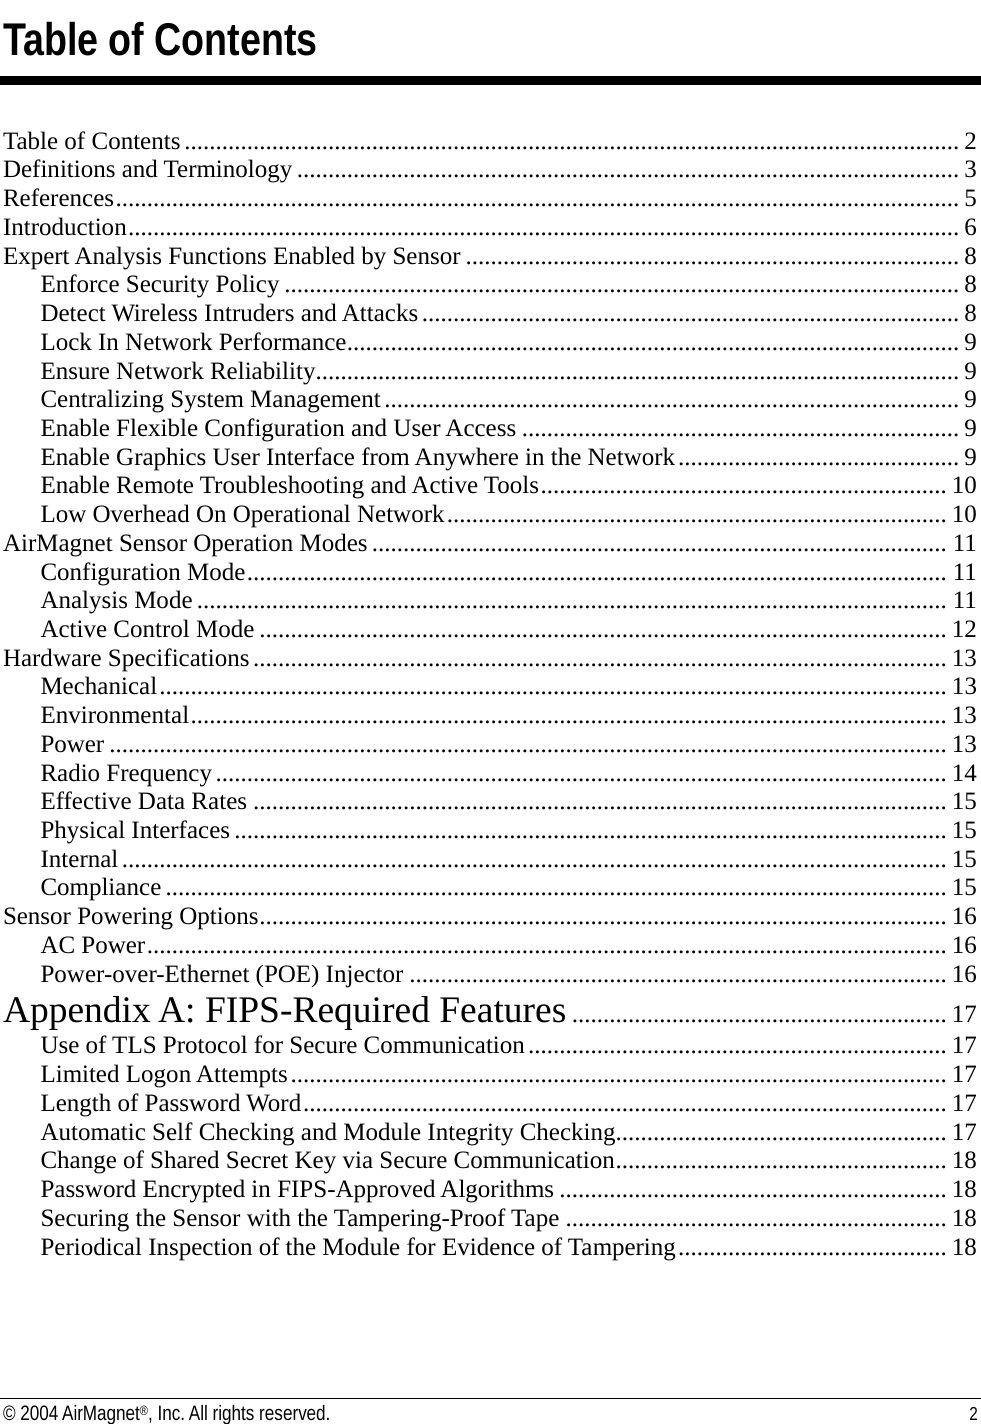 Table of Contents  Table of Contents............................................................................................................................ 2 Definitions and Terminology .......................................................................................................... 3 References....................................................................................................................................... 5 Introduction..................................................................................................................................... 6 Expert Analysis Functions Enabled by Sensor ............................................................................... 8 Enforce Security Policy ............................................................................................................ 8 Detect Wireless Intruders and Attacks...................................................................................... 8 Lock In Network Performance.................................................................................................. 9 Ensure Network Reliability....................................................................................................... 9 Centralizing System Management............................................................................................ 9 Enable Flexible Configuration and User Access ...................................................................... 9 Enable Graphics User Interface from Anywhere in the Network............................................. 9 Enable Remote Troubleshooting and Active Tools................................................................. 10 Low Overhead On Operational Network................................................................................ 10 AirMagnet Sensor Operation Modes ............................................................................................ 11 Configuration Mode................................................................................................................ 11 Analysis Mode ........................................................................................................................ 11 Active Control Mode .............................................................................................................. 12 Hardware Specifications............................................................................................................... 13 Mechanical.............................................................................................................................. 13 Environmental......................................................................................................................... 13 Power ...................................................................................................................................... 13 Radio Frequency..................................................................................................................... 14 Effective Data Rates ............................................................................................................... 15 Physical Interfaces .................................................................................................................. 15 Internal.................................................................................................................................... 15 Compliance ............................................................................................................................. 15 Sensor Powering Options.............................................................................................................. 16 AC Power................................................................................................................................ 16 Power-over-Ethernet (POE) Injector ...................................................................................... 16 Appendix A: FIPS-Required Features............................................................ 17 Use of TLS Protocol for Secure Communication................................................................... 17 Limited Logon Attempts......................................................................................................... 17 Length of Password Word....................................................................................................... 17 Automatic Self Checking and Module Integrity Checking..................................................... 17 Change of Shared Secret Key via Secure Communication..................................................... 18 Password Encrypted in FIPS-Approved Algorithms .............................................................. 18 Securing the Sensor with the Tampering-Proof Tape ............................................................. 18 Periodical Inspection of the Module for Evidence of Tampering........................................... 18 © 2004 AirMagnet®, Inc. All rights reserved.  2  